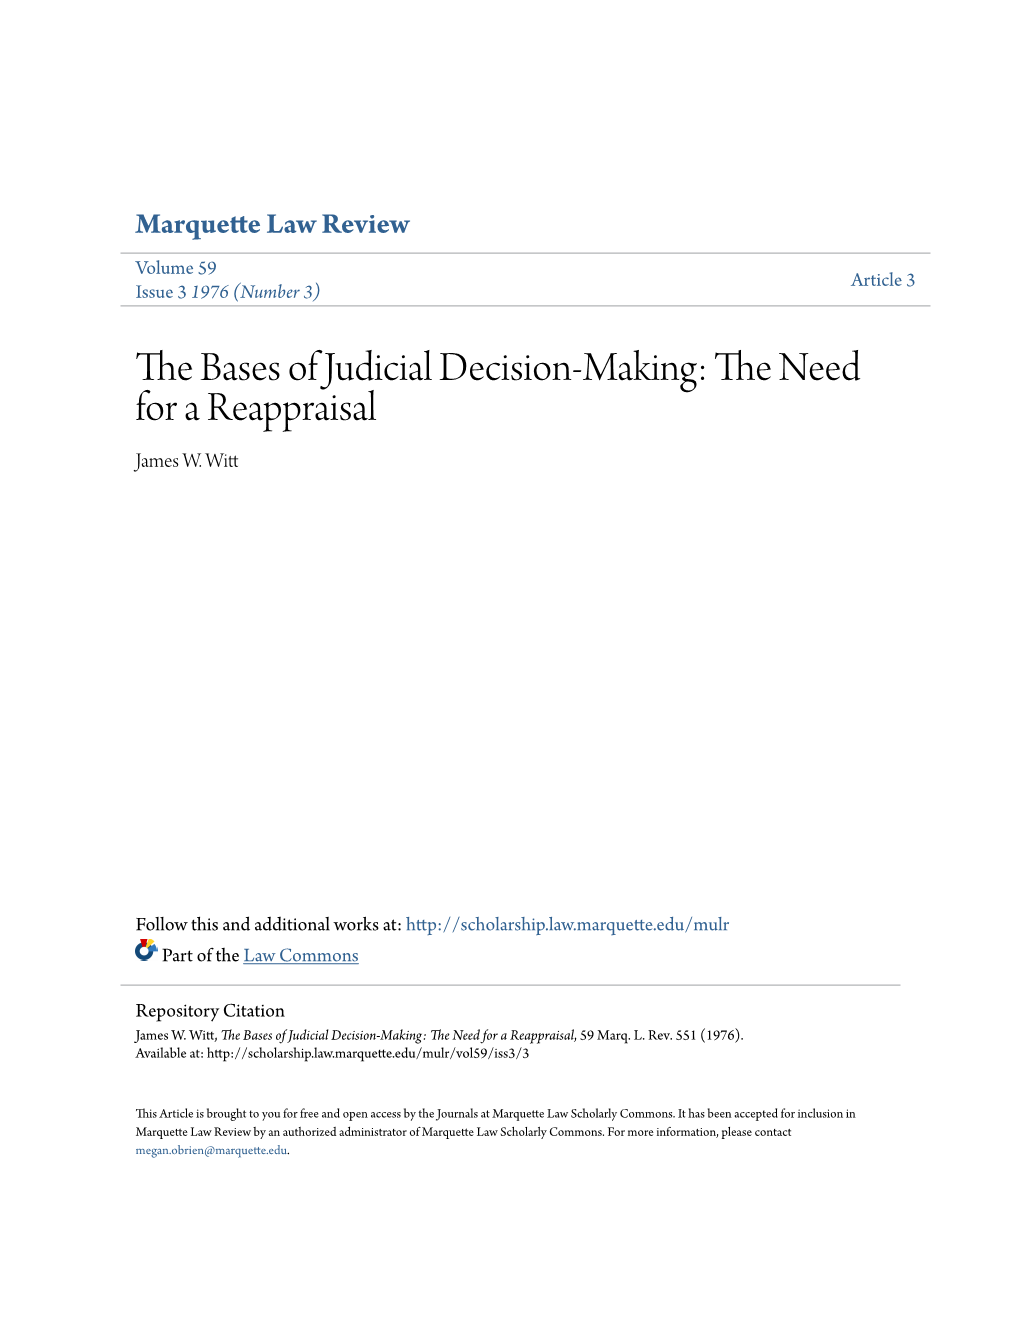 The Bases of Judicial Decision-Making: the Need for a Reappraisal, 59 Marq